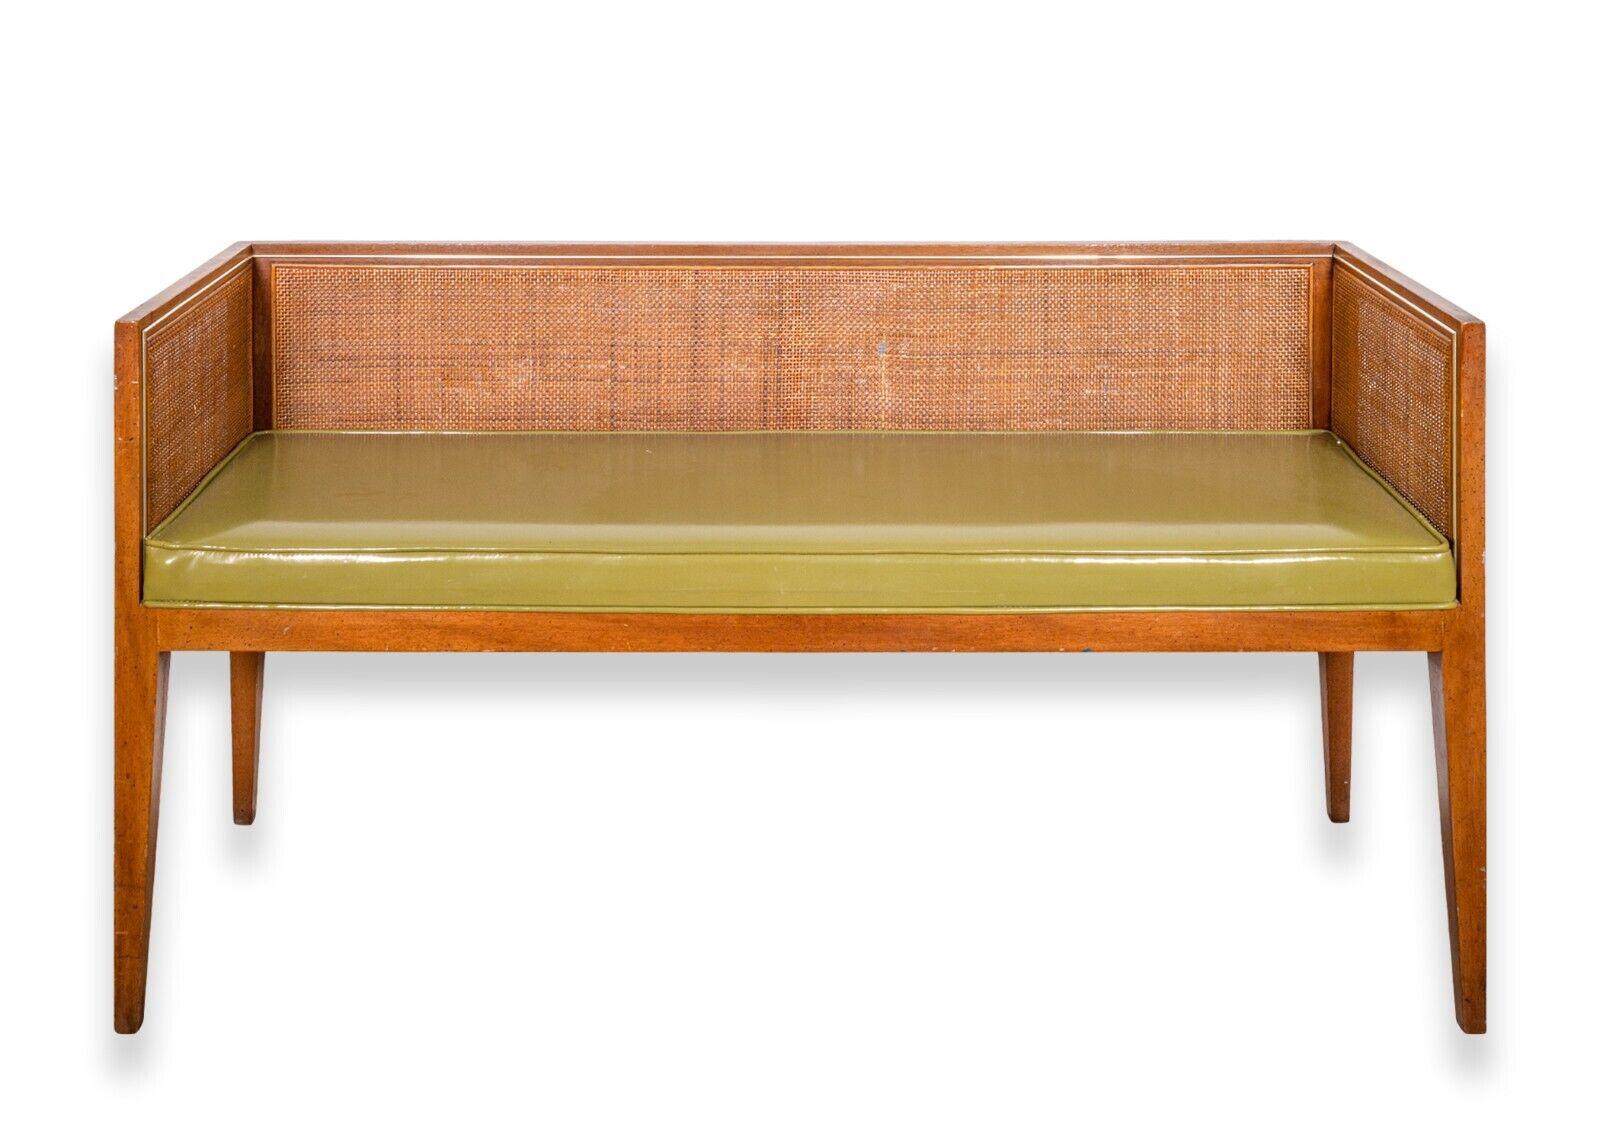 A Baker mid century modern wood and cane green Naugahyde bench. This very pretty bench features a very clean rectangular design with hairpin legs, a shiny green leather seat, and a full wooden frame construction with can detailing. This piece is in